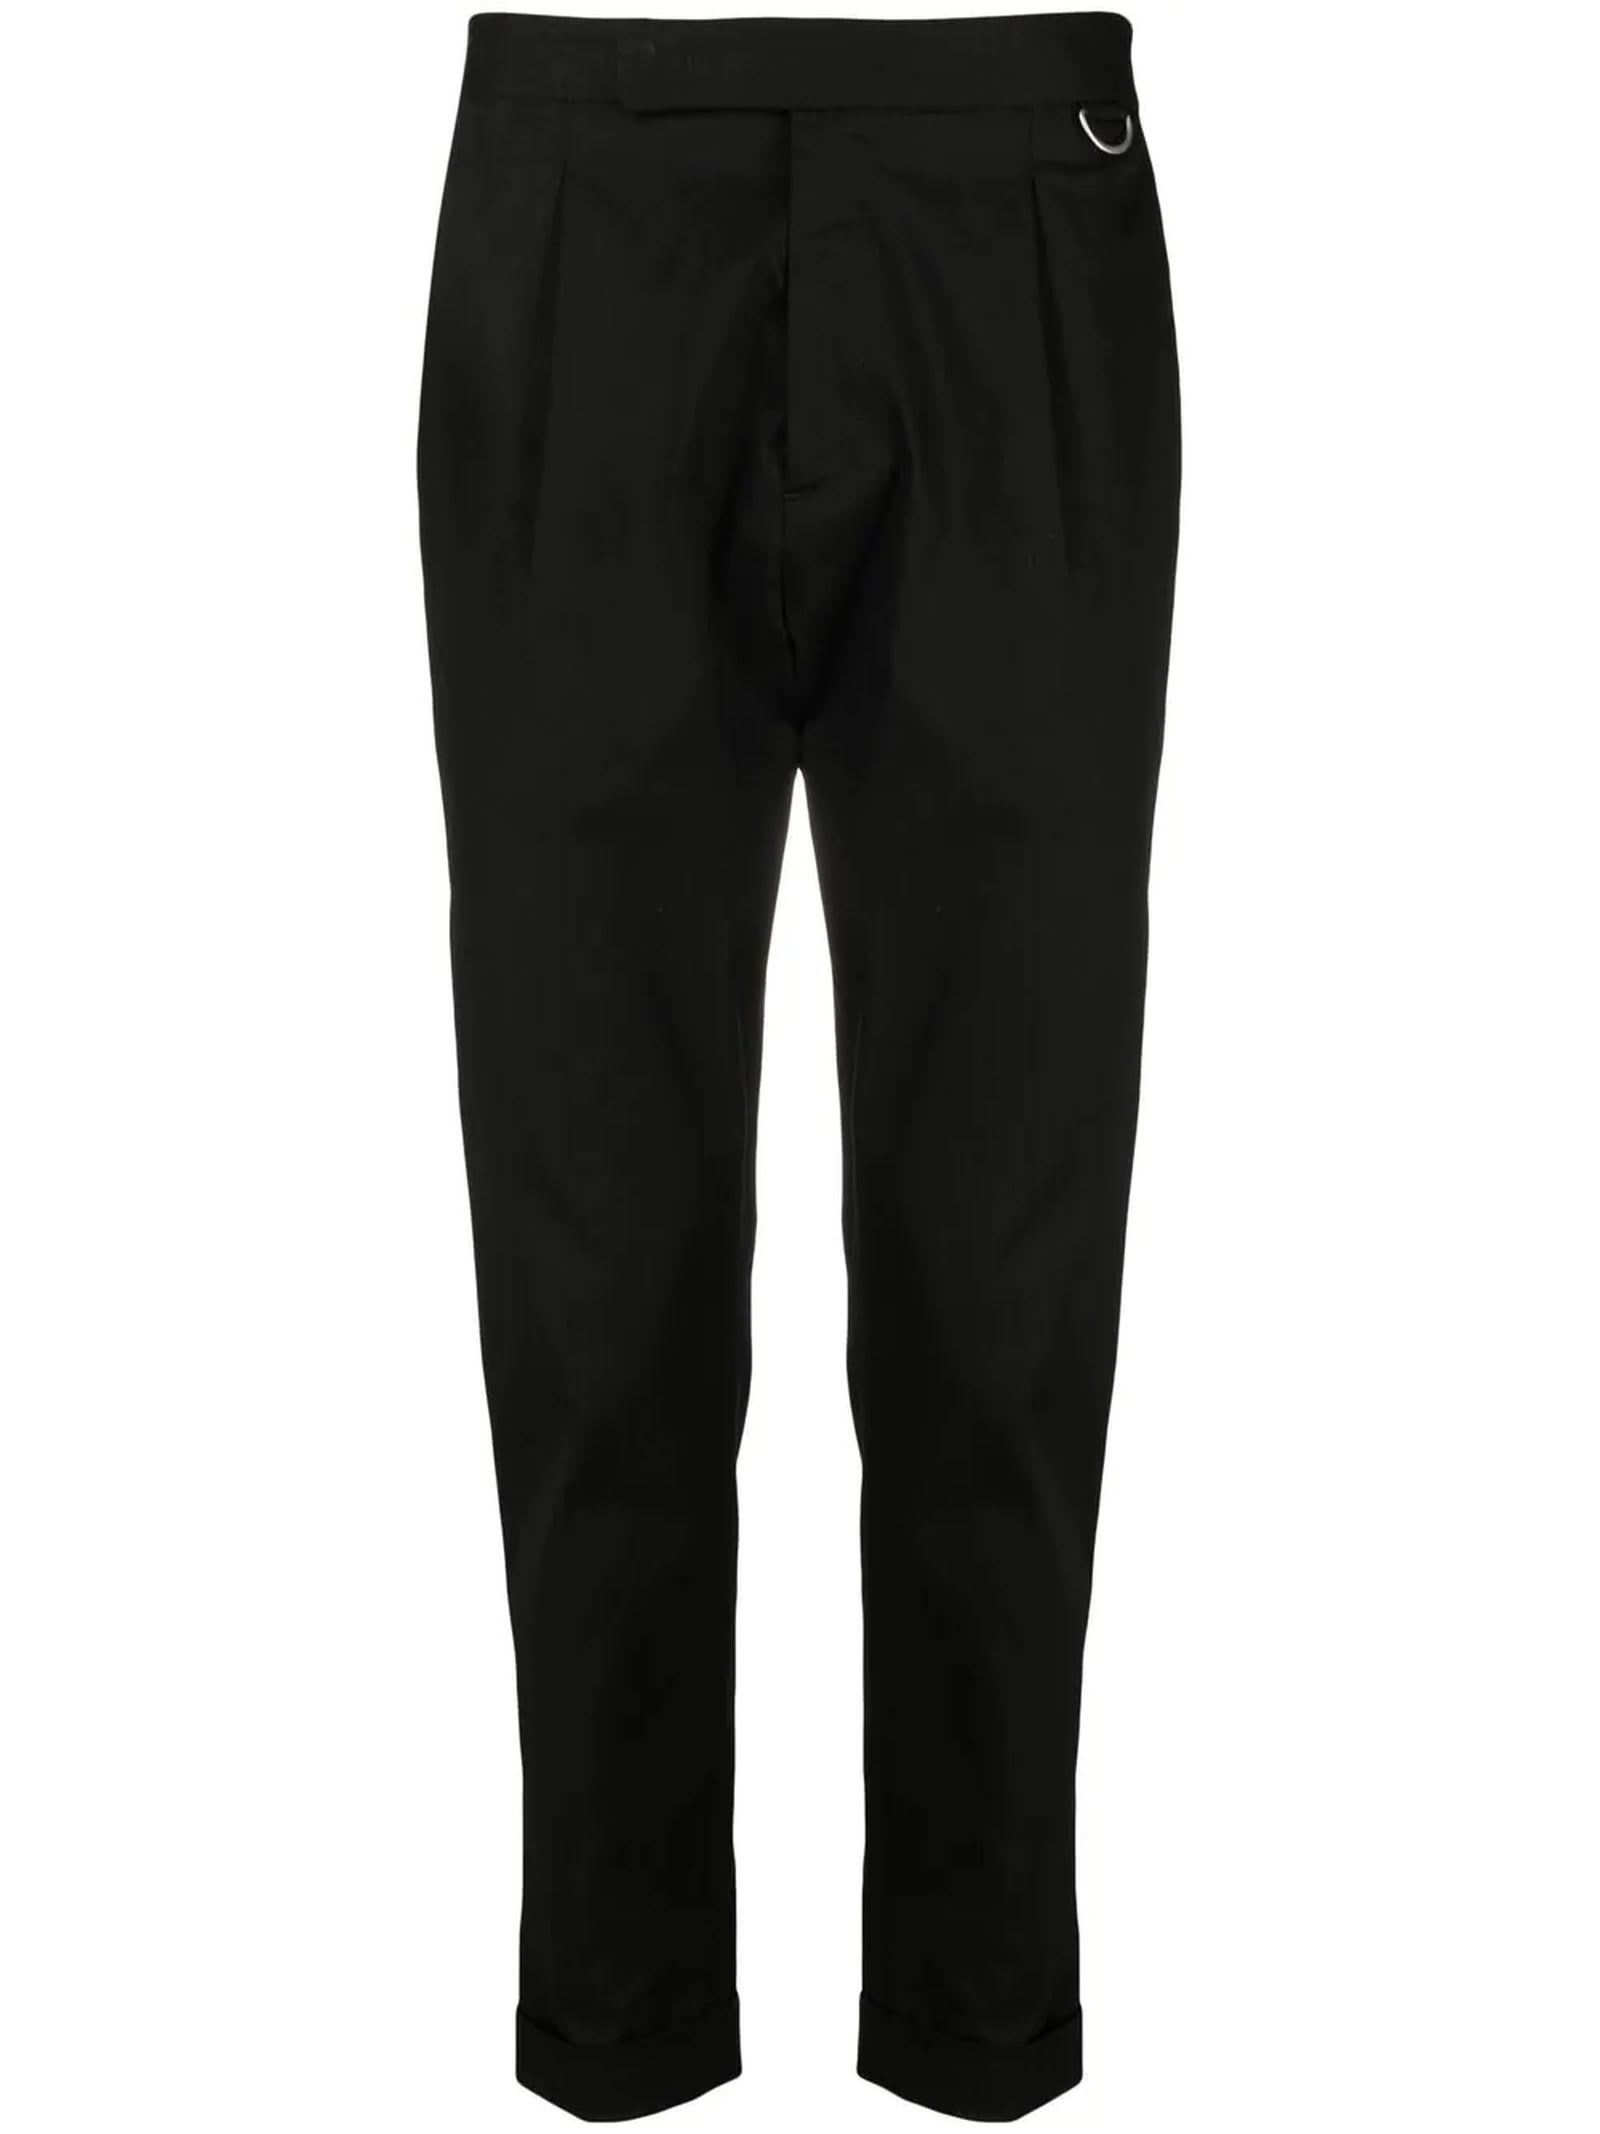 Low Brand Black Stretch Cotton Trousers